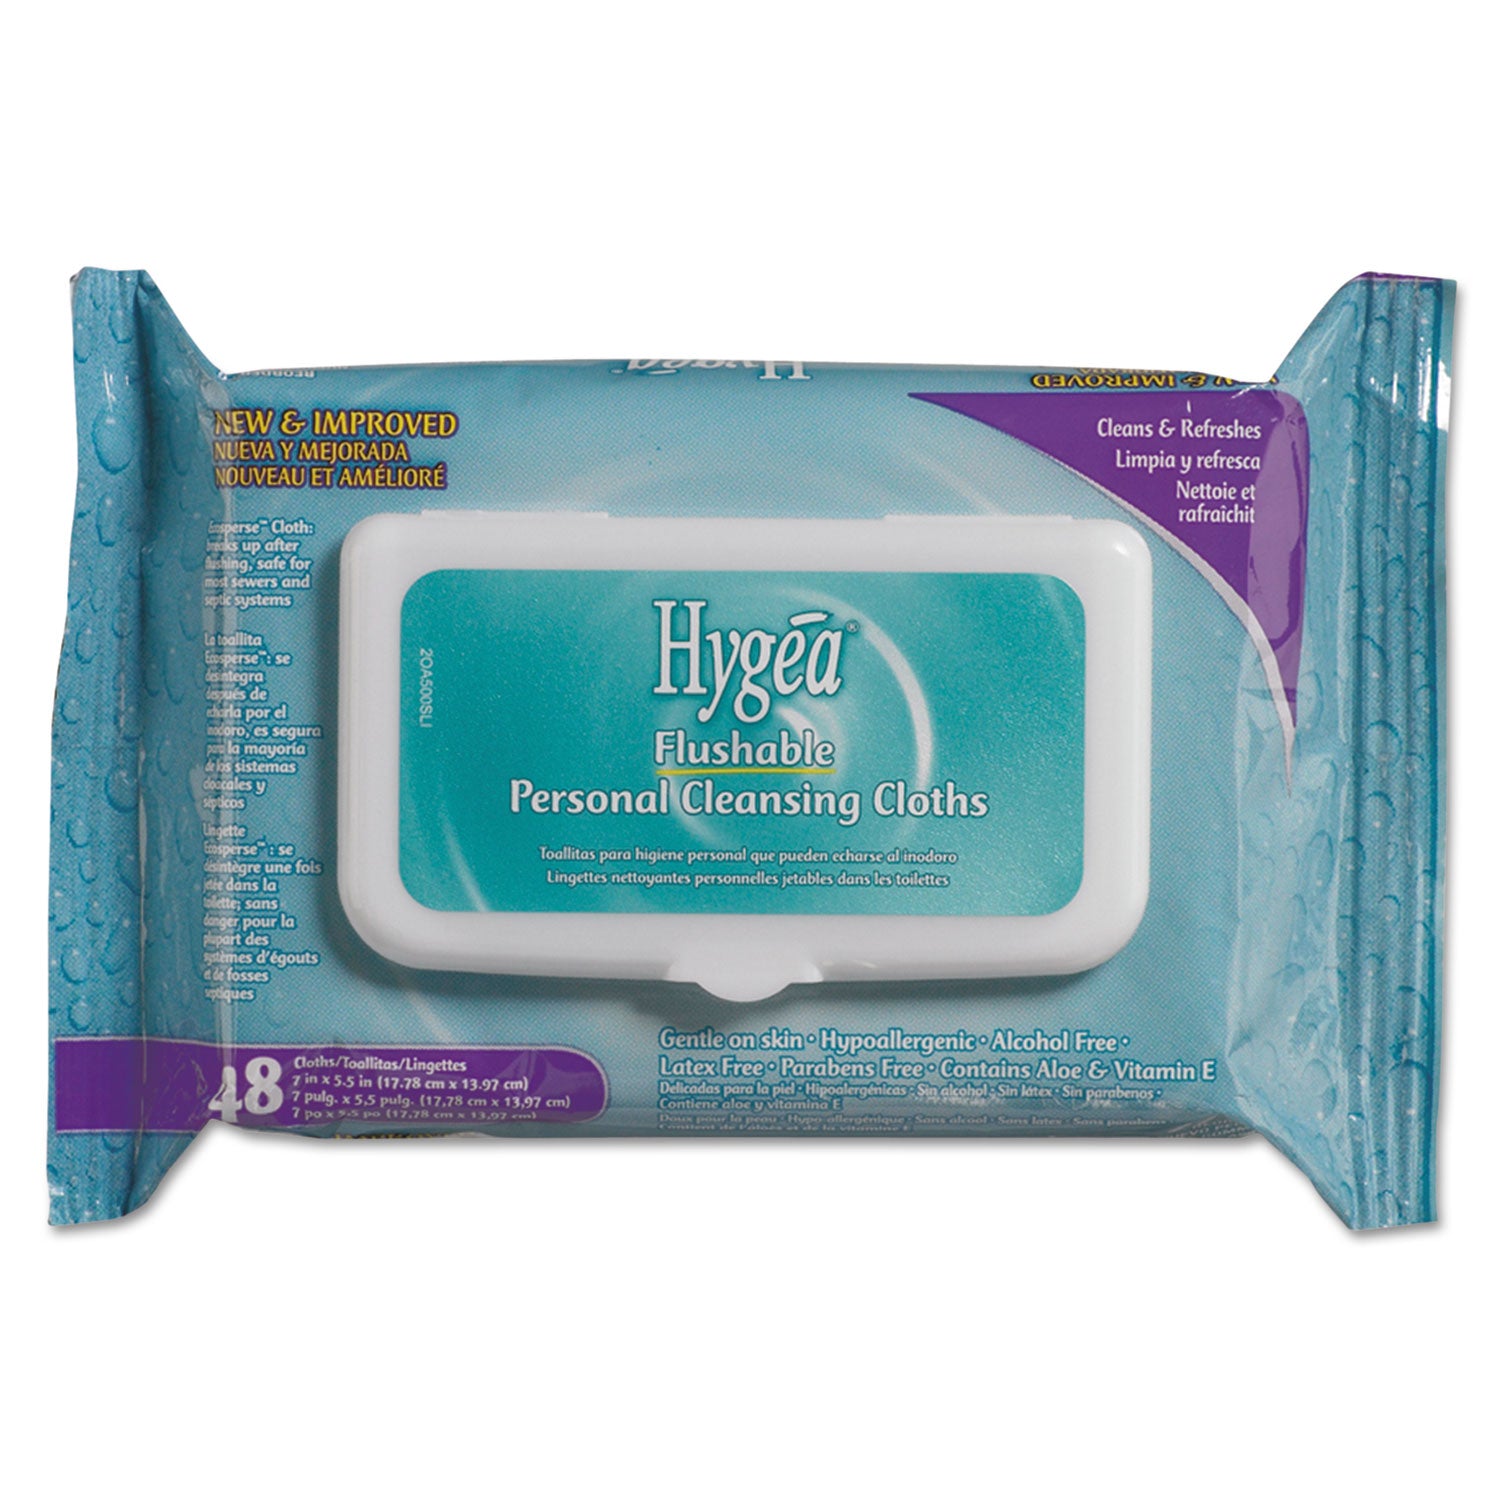 hygea-flushable-personal-cleansing-cloths-625-x-538-flowering-herbs-white-48-pack-12-packs-carton_nica500f48 - 1